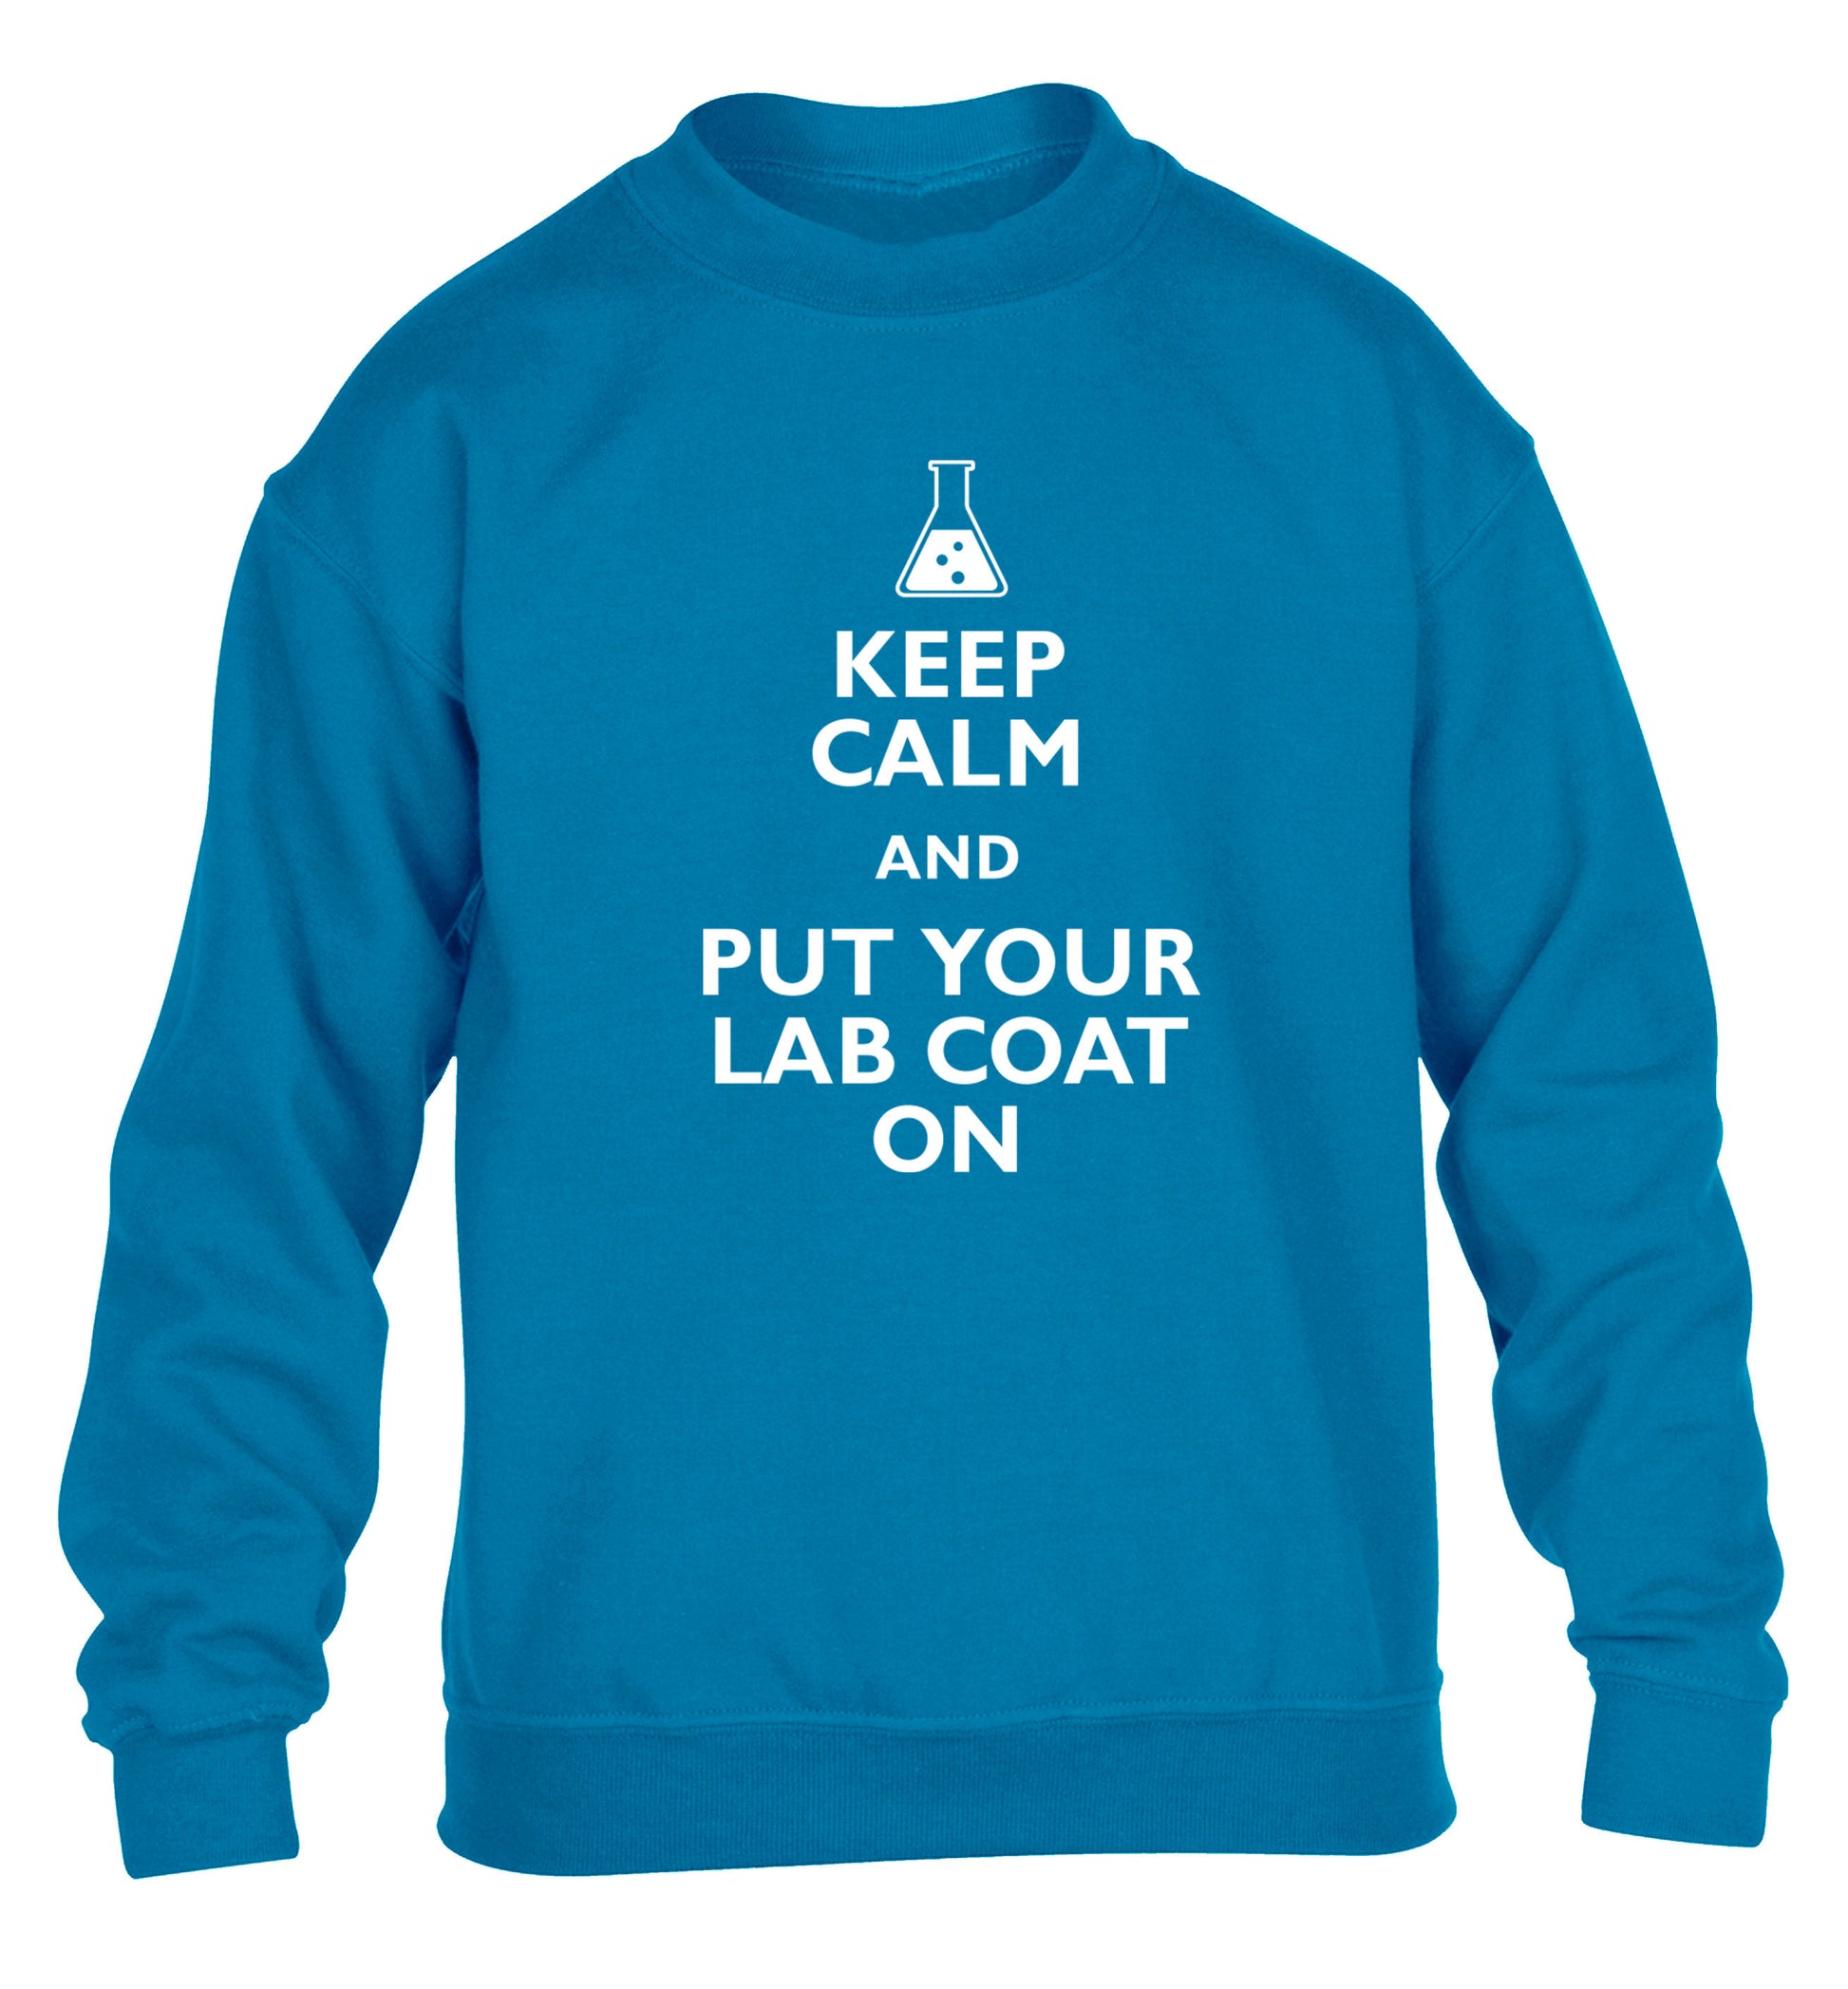 Keep calm and put your lab coat on children's blue sweater 12-14 Years